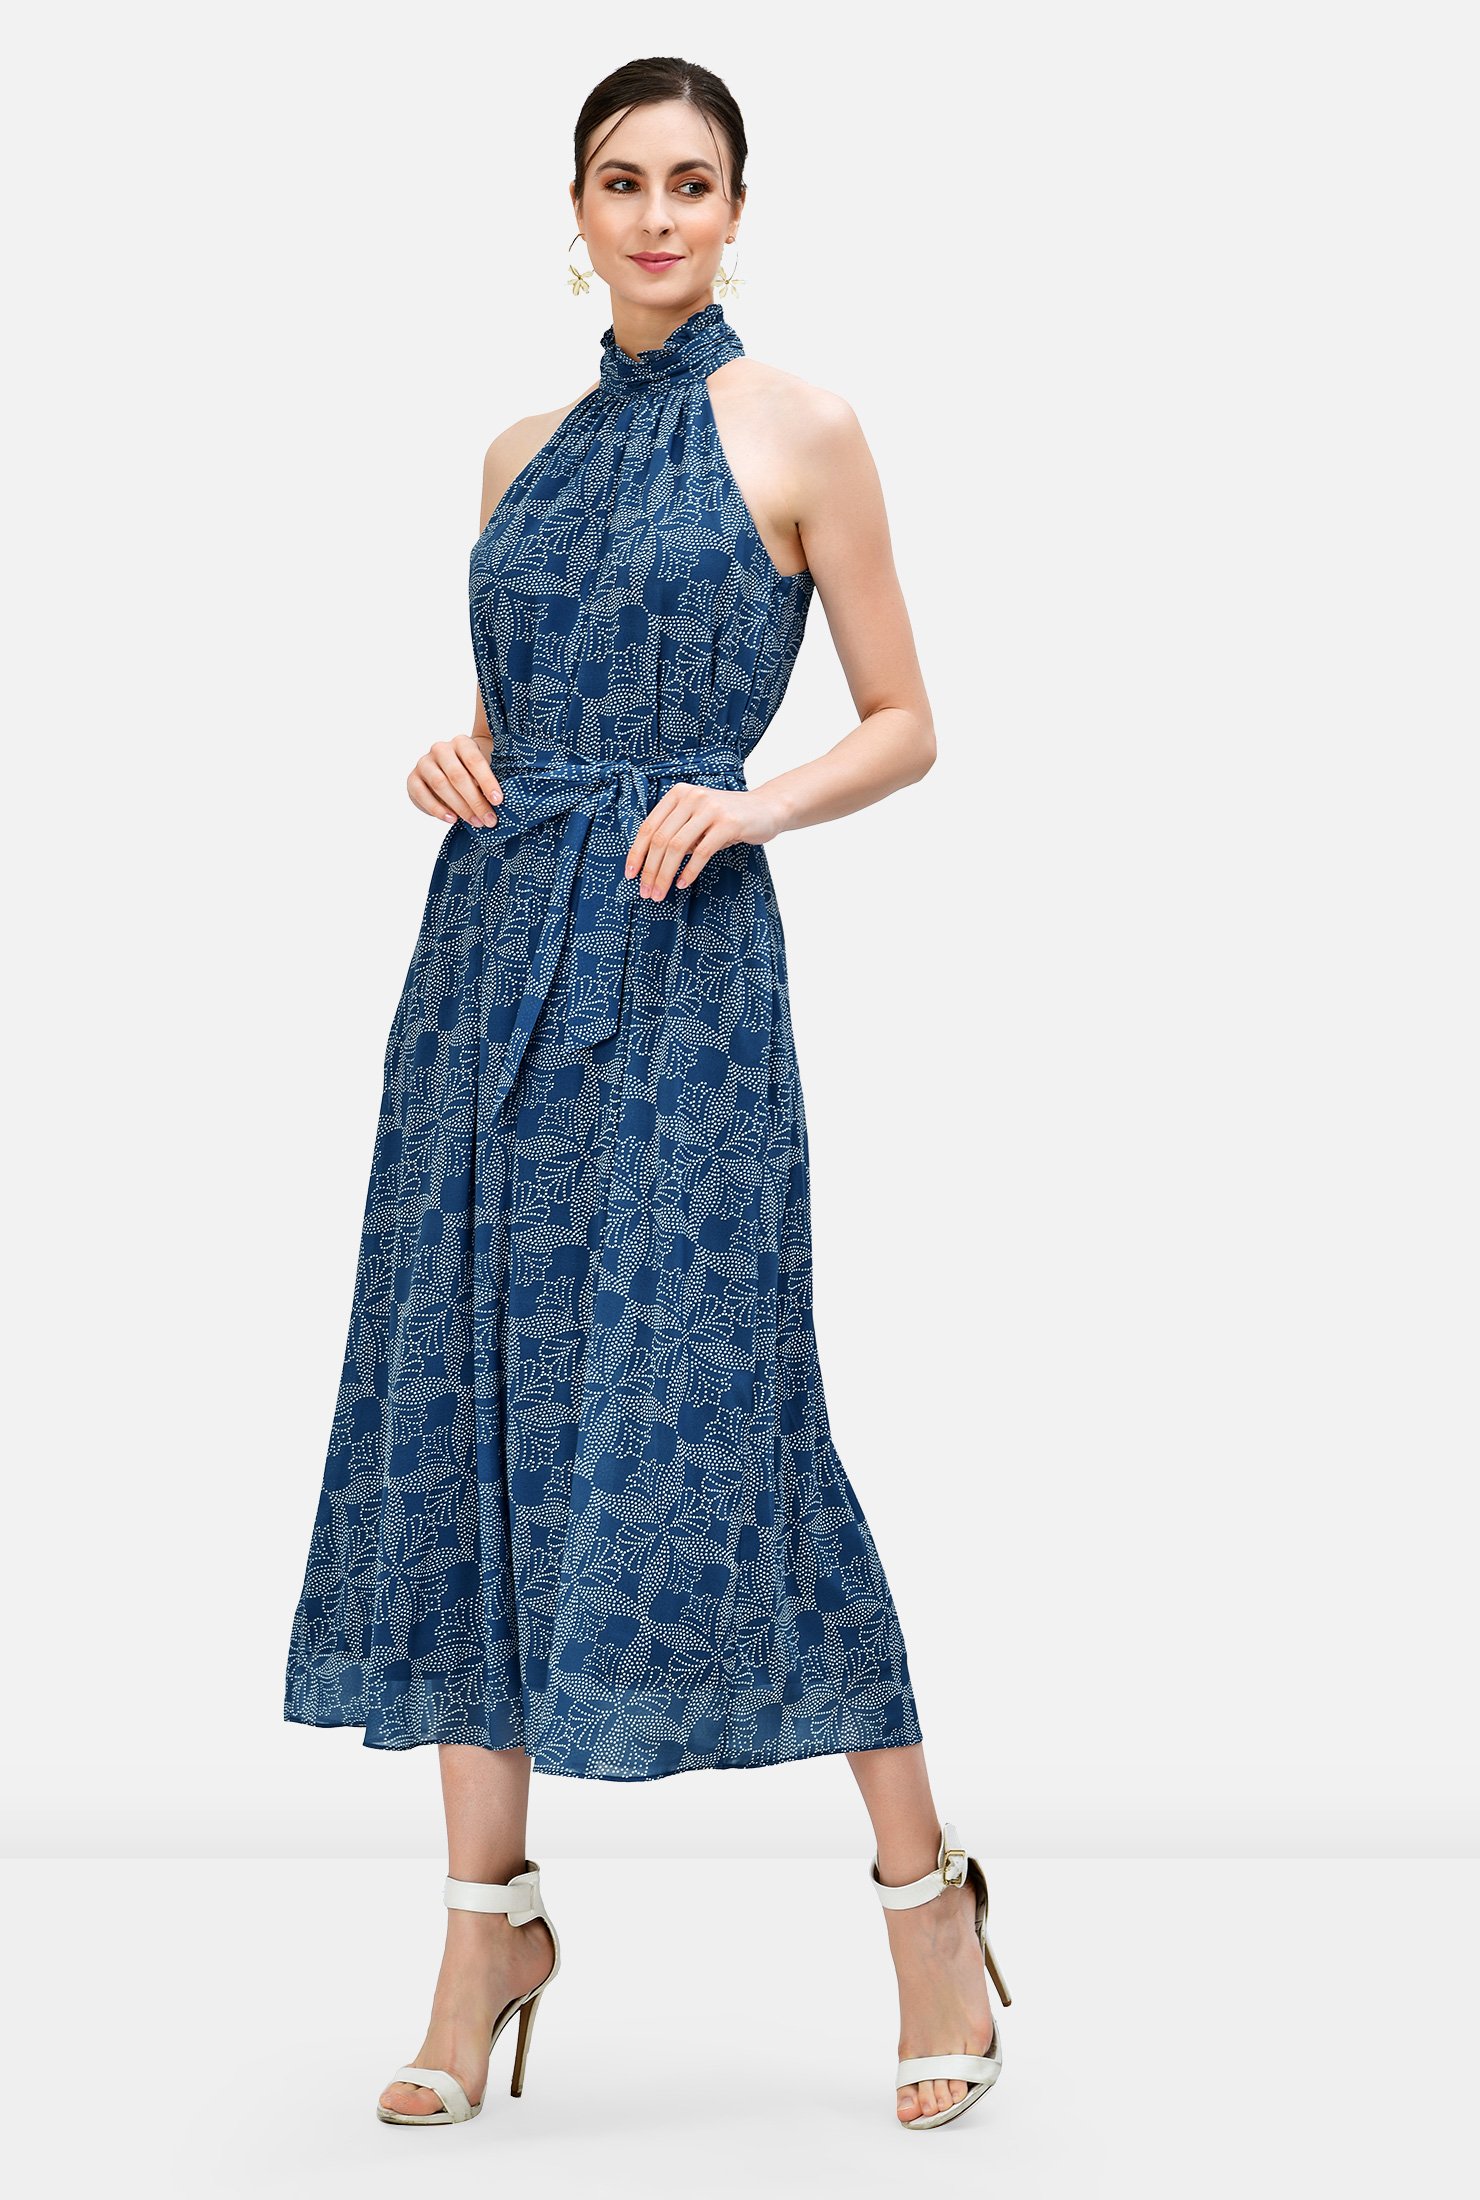 Light, sheer floral dot print makes a charming first impression, and then the details of our breezy georgette dress emerge from the ruffle frill trimmed halter neck that releases to a full flare hem and is cinched in with an optional self-sash-tie belt.